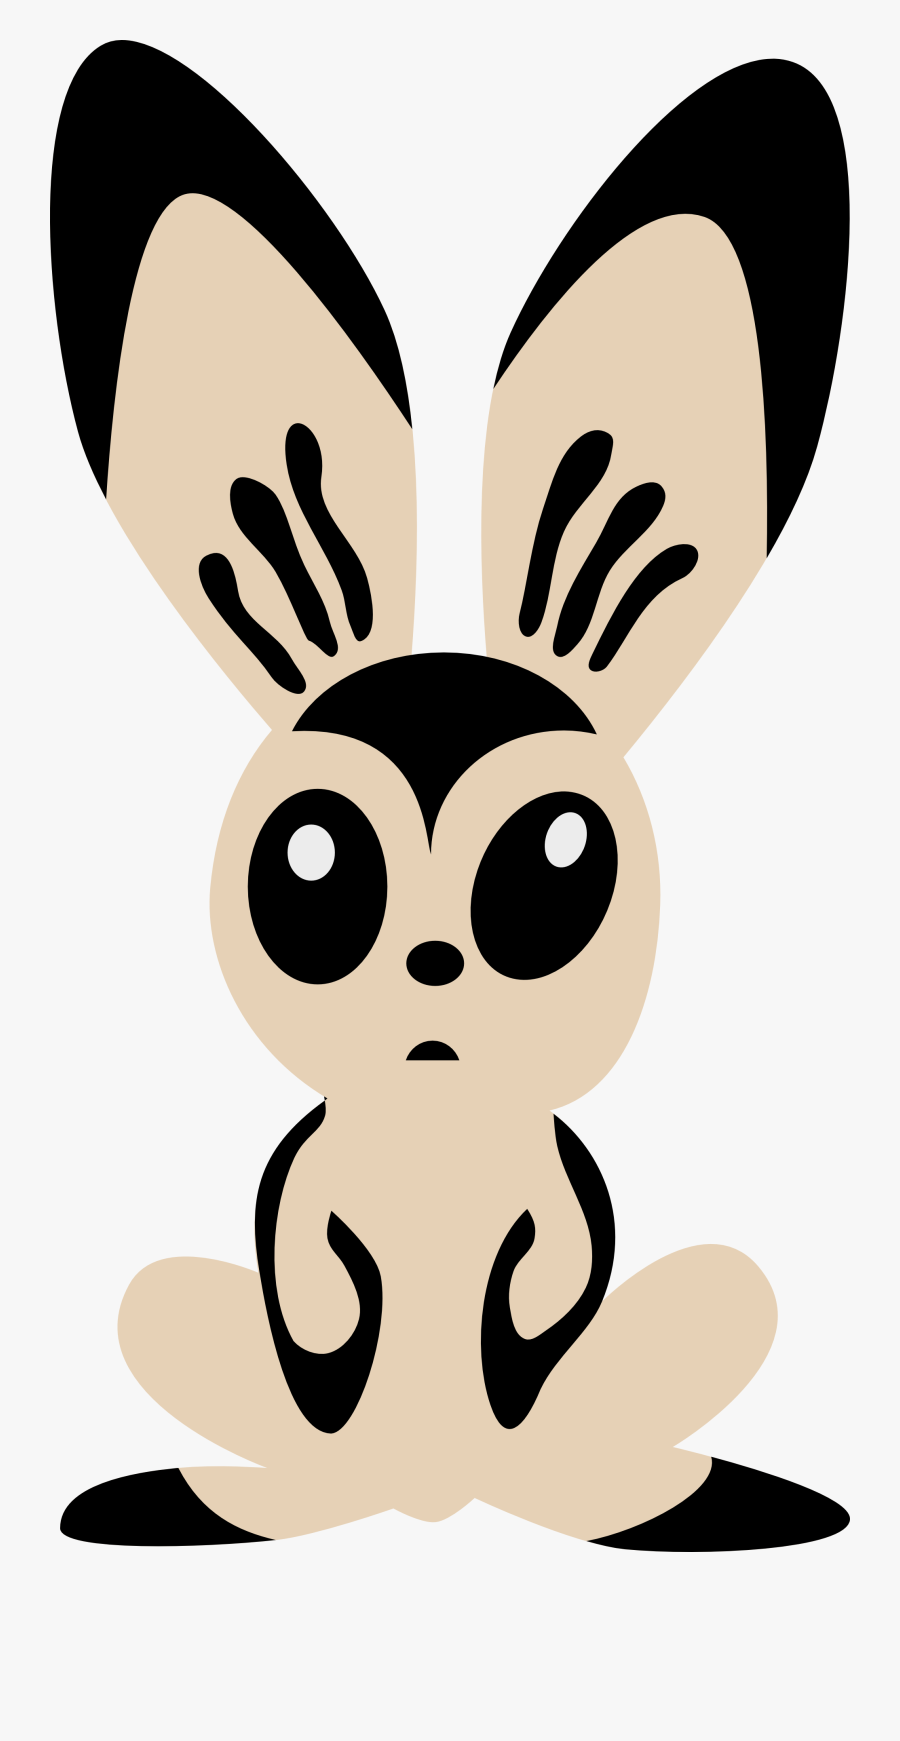 Hare By Rones - Long Ear Cartoon, Transparent Clipart